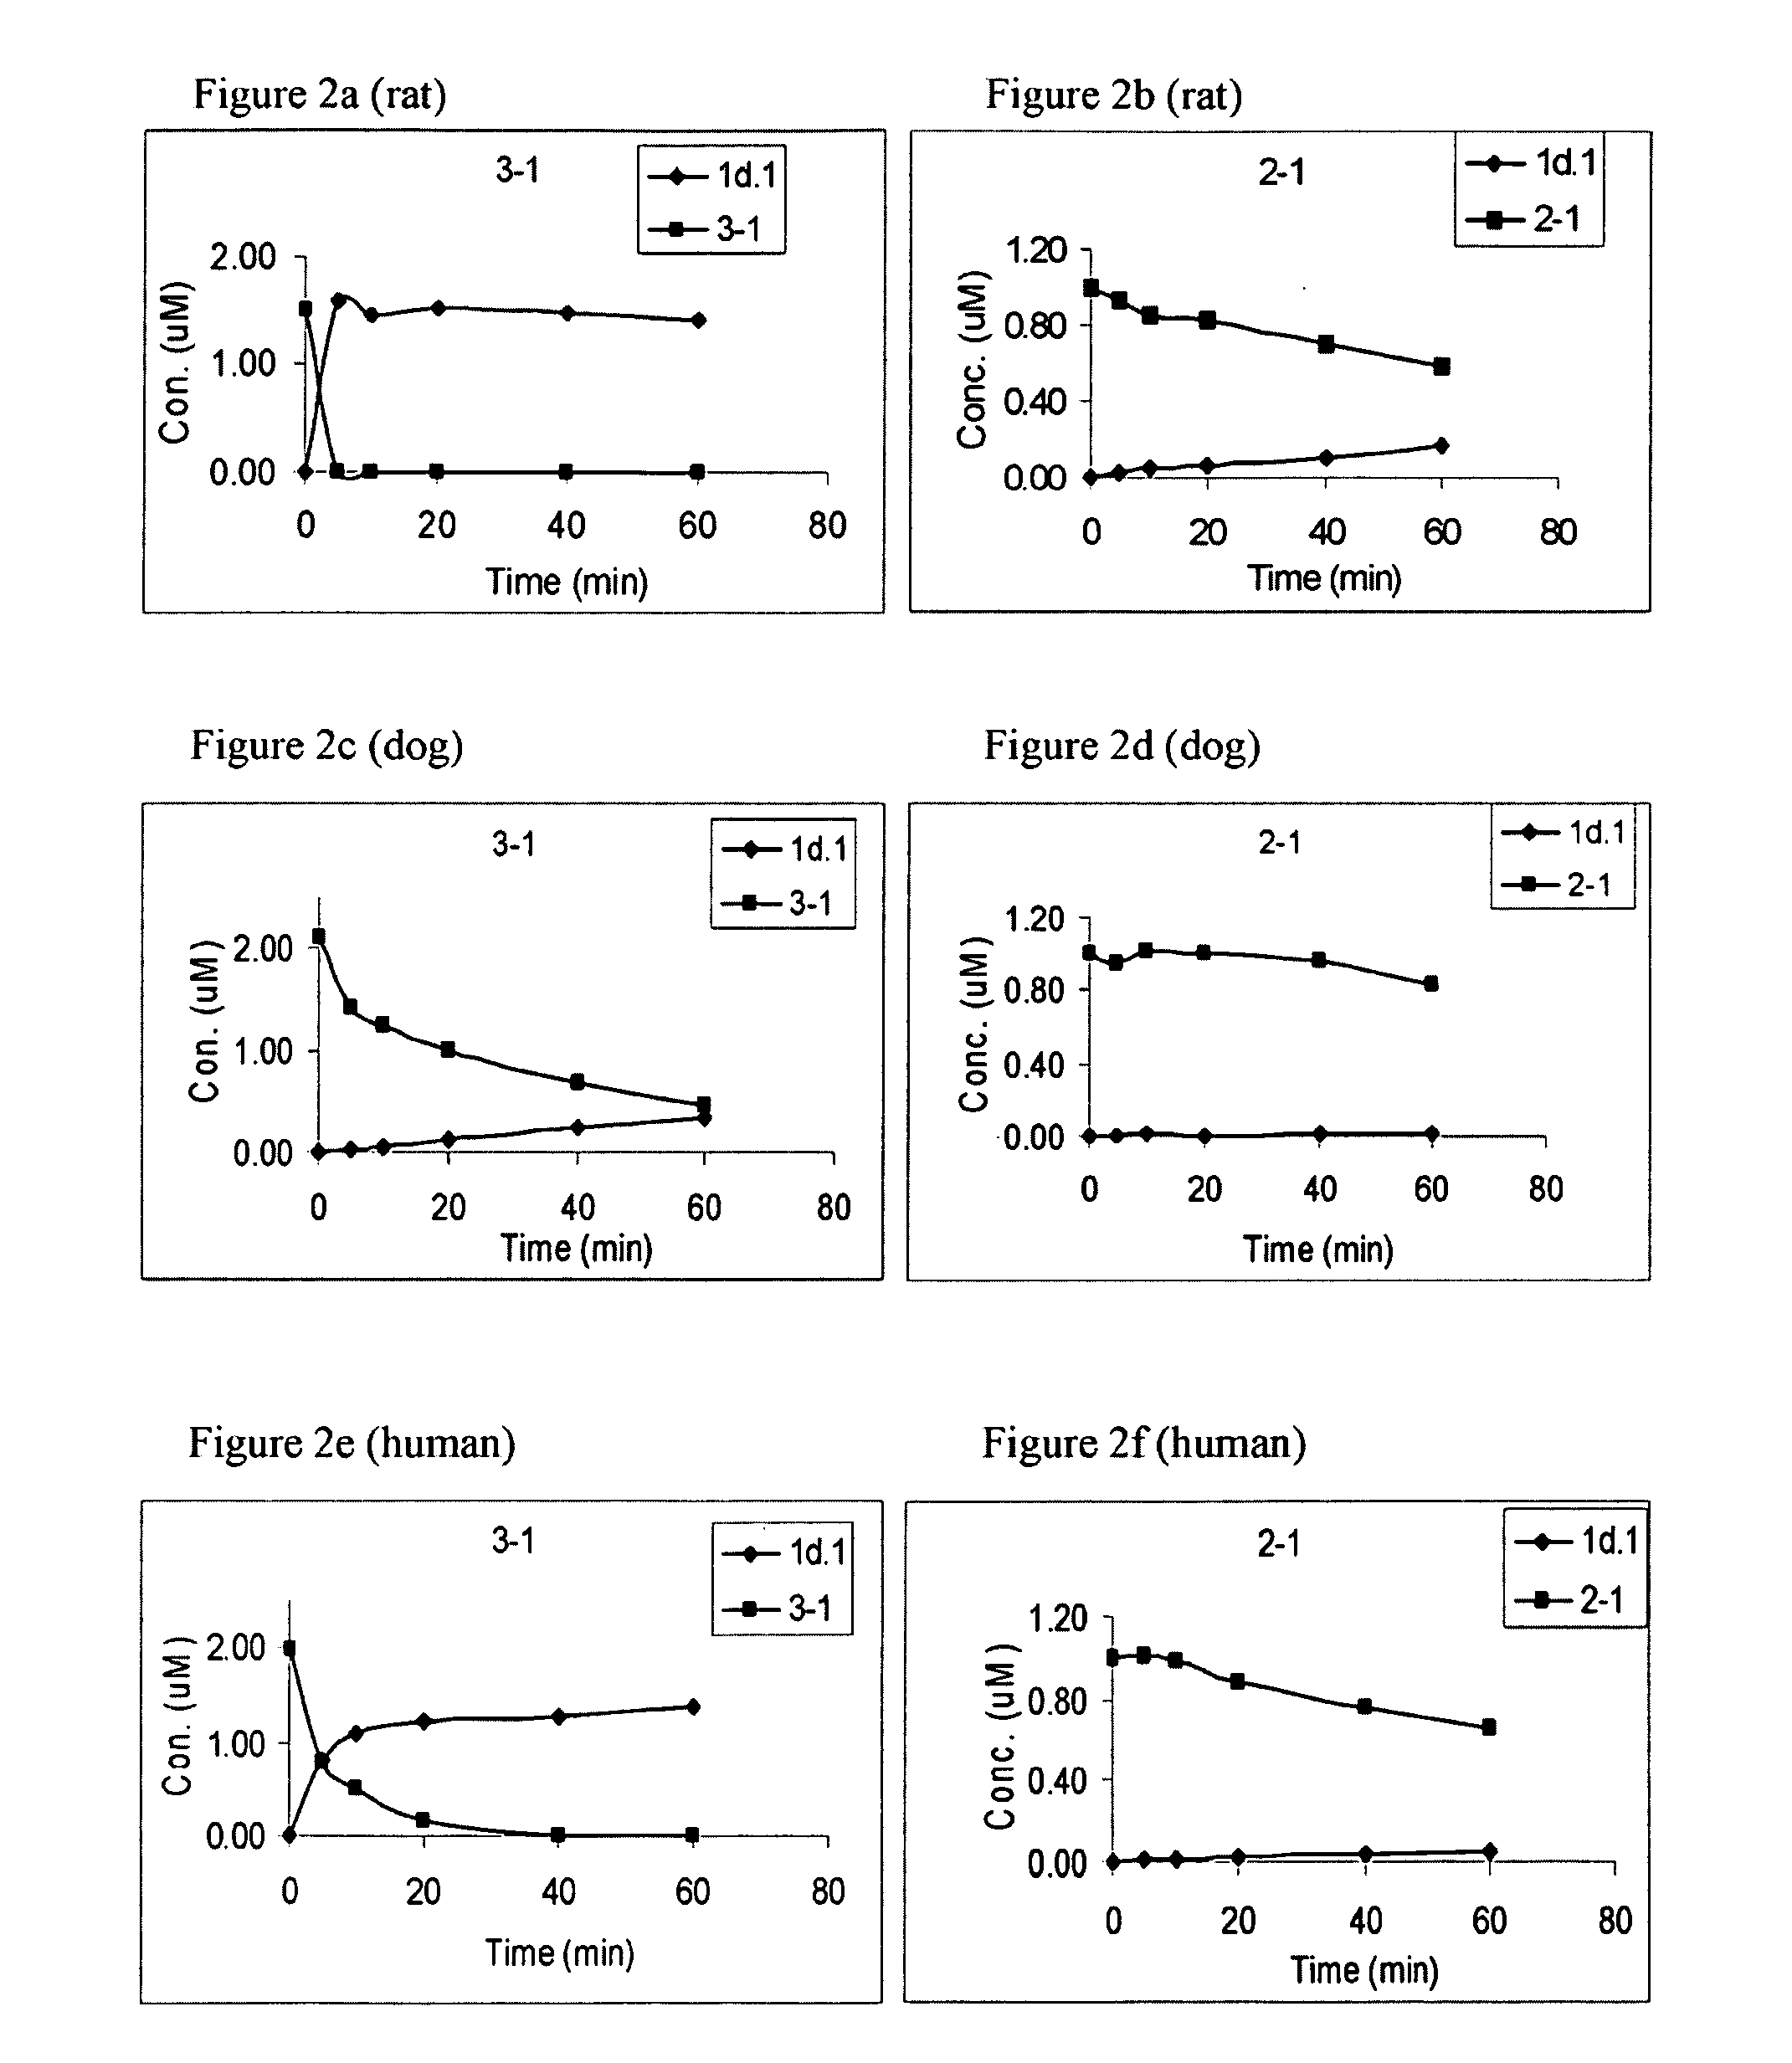 Substituted 3-isobutyl-9,10-dimethoxy-1,3,4,6,7,11b-hexahydro-2h-pyrido[2,1-a]isoquinolin-2-ol compounds and methods relating thereto